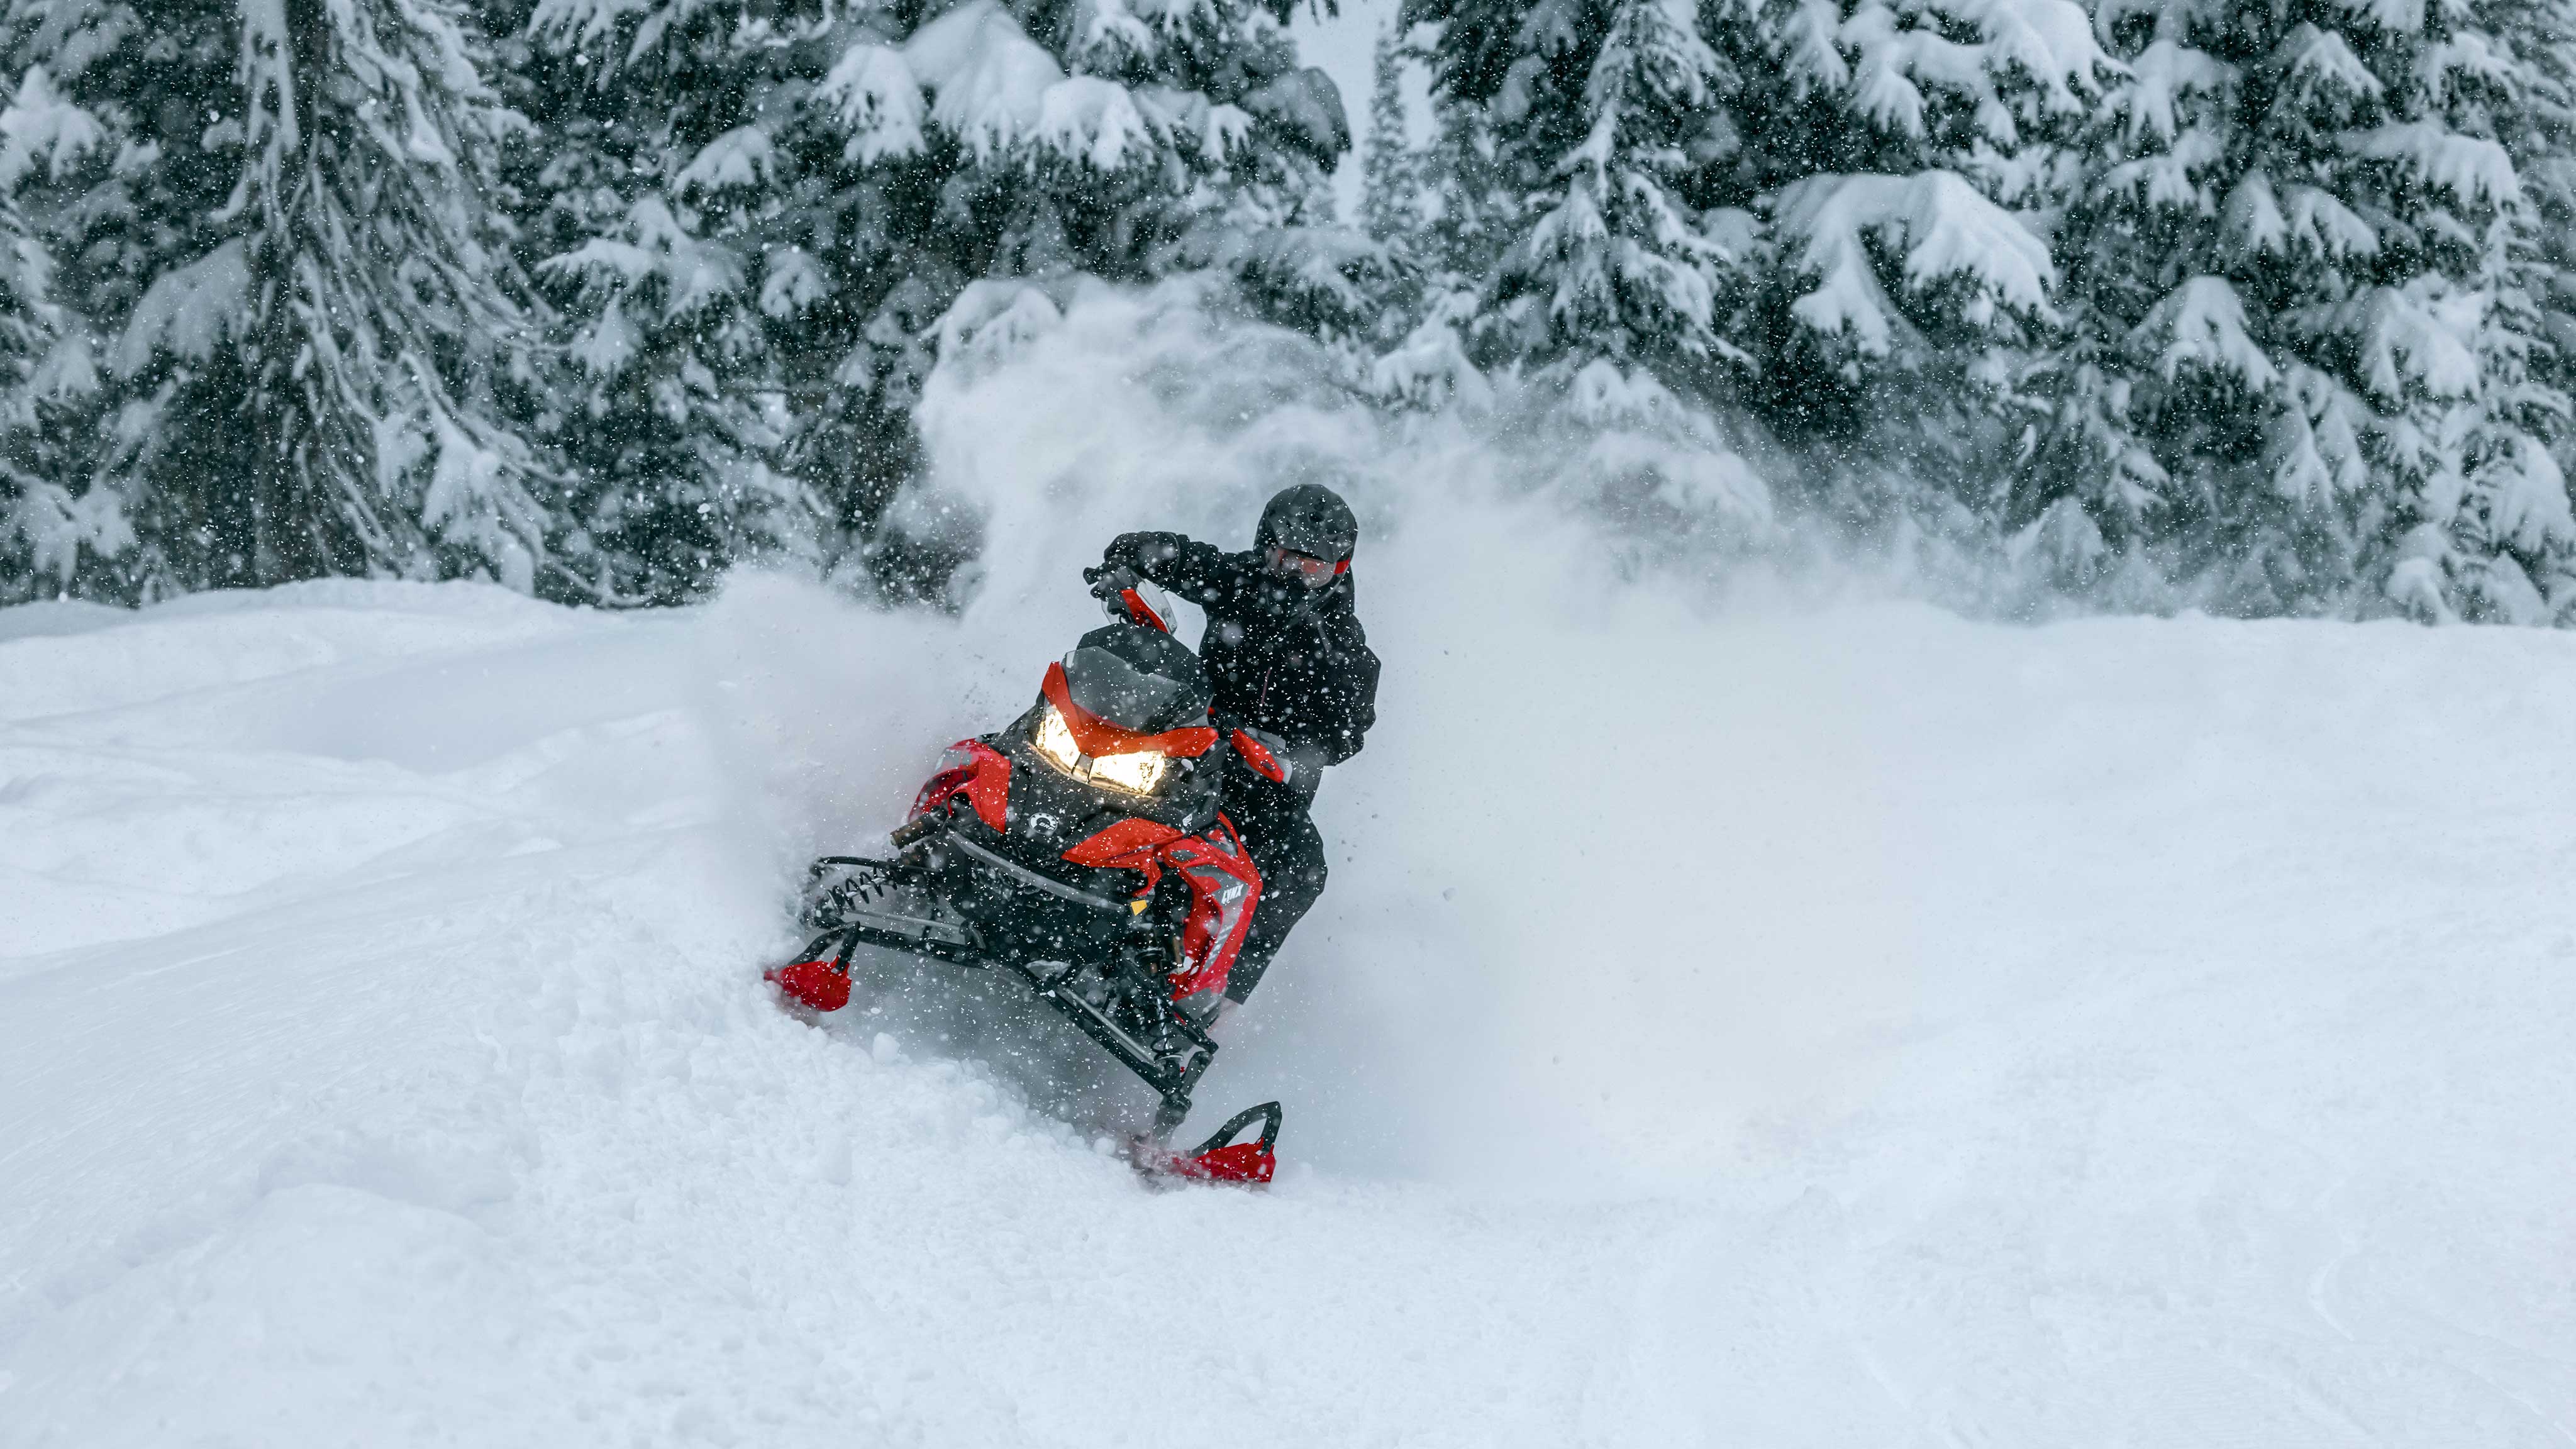 Single rider taking his 2023 Lynx snowmobile for a ride in a snowy forest